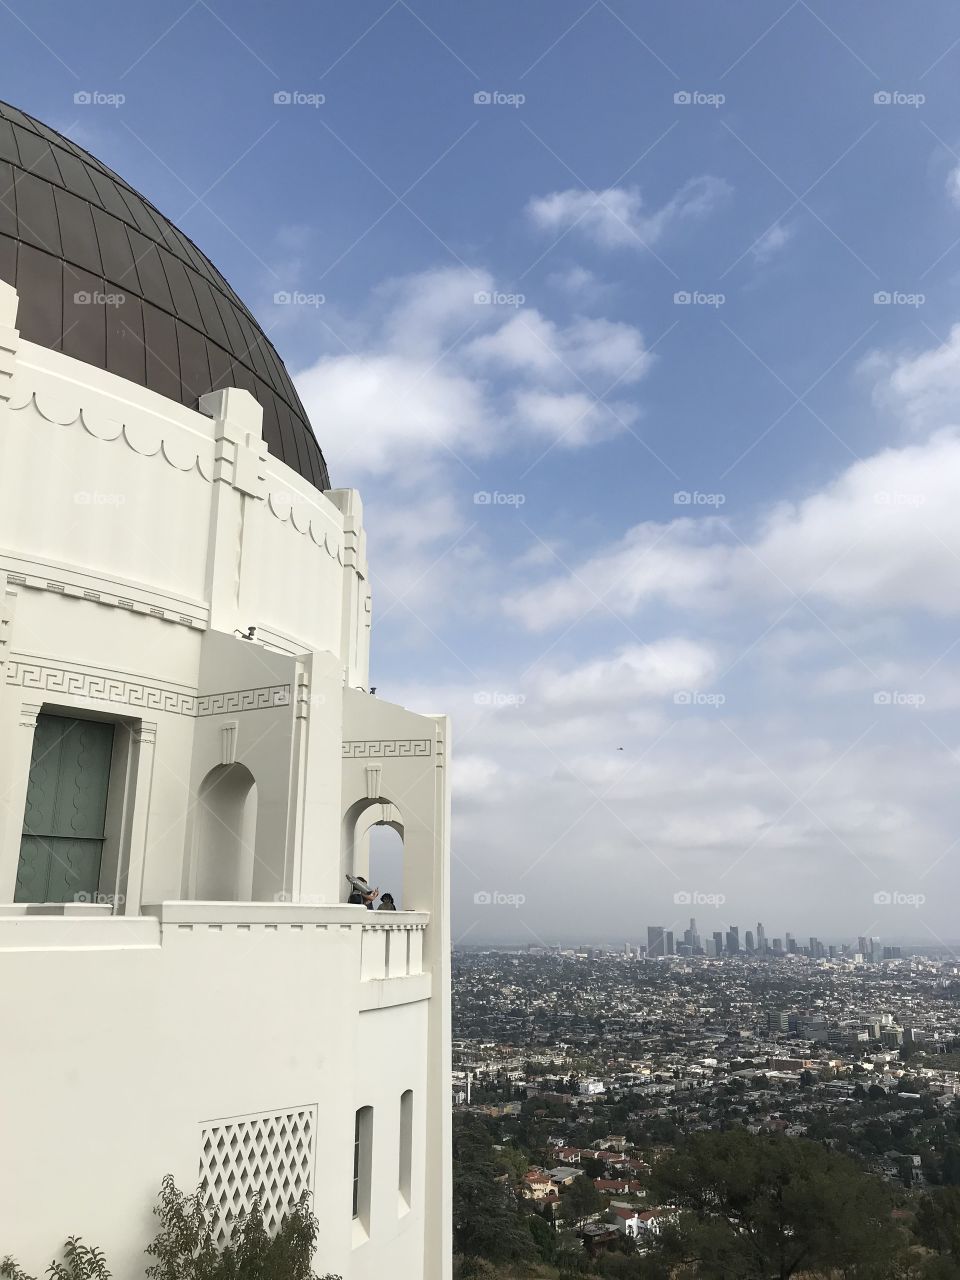 Beautiful view from the Griffith observatory. A great view of the city of Los Angeles.